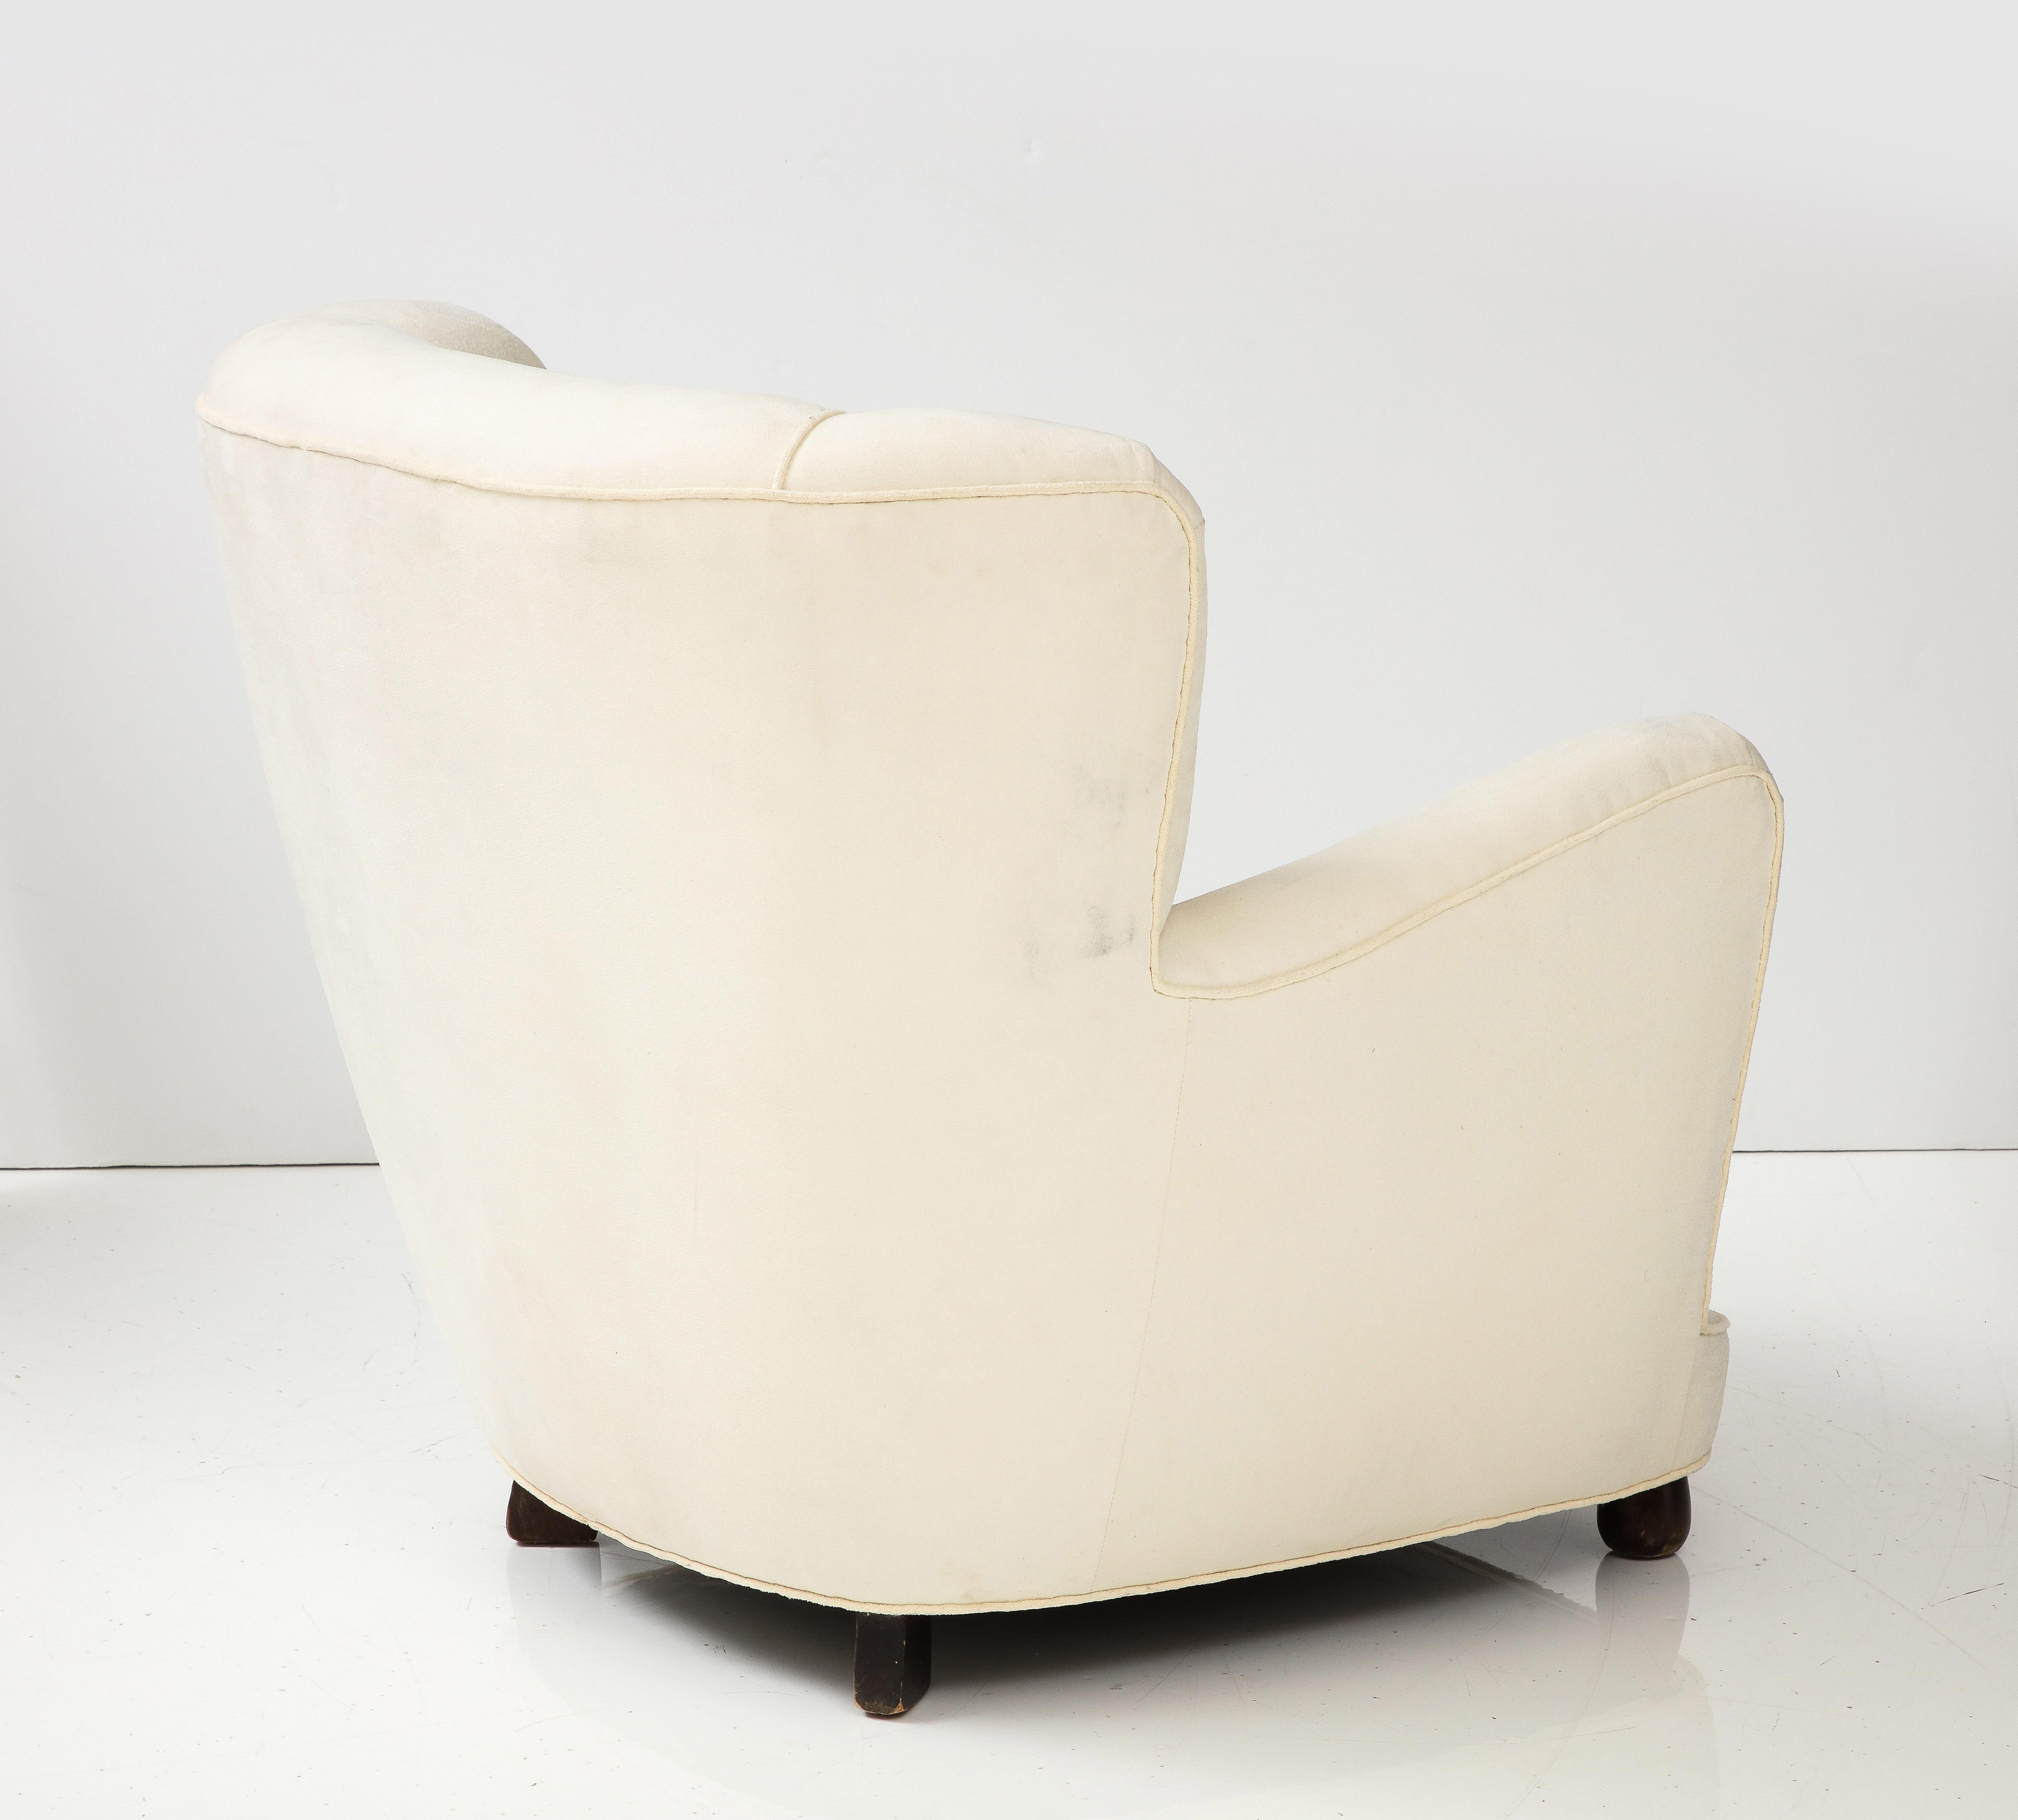 Danish Upholstered Club Chair in Muslin, 1940's For Sale 7